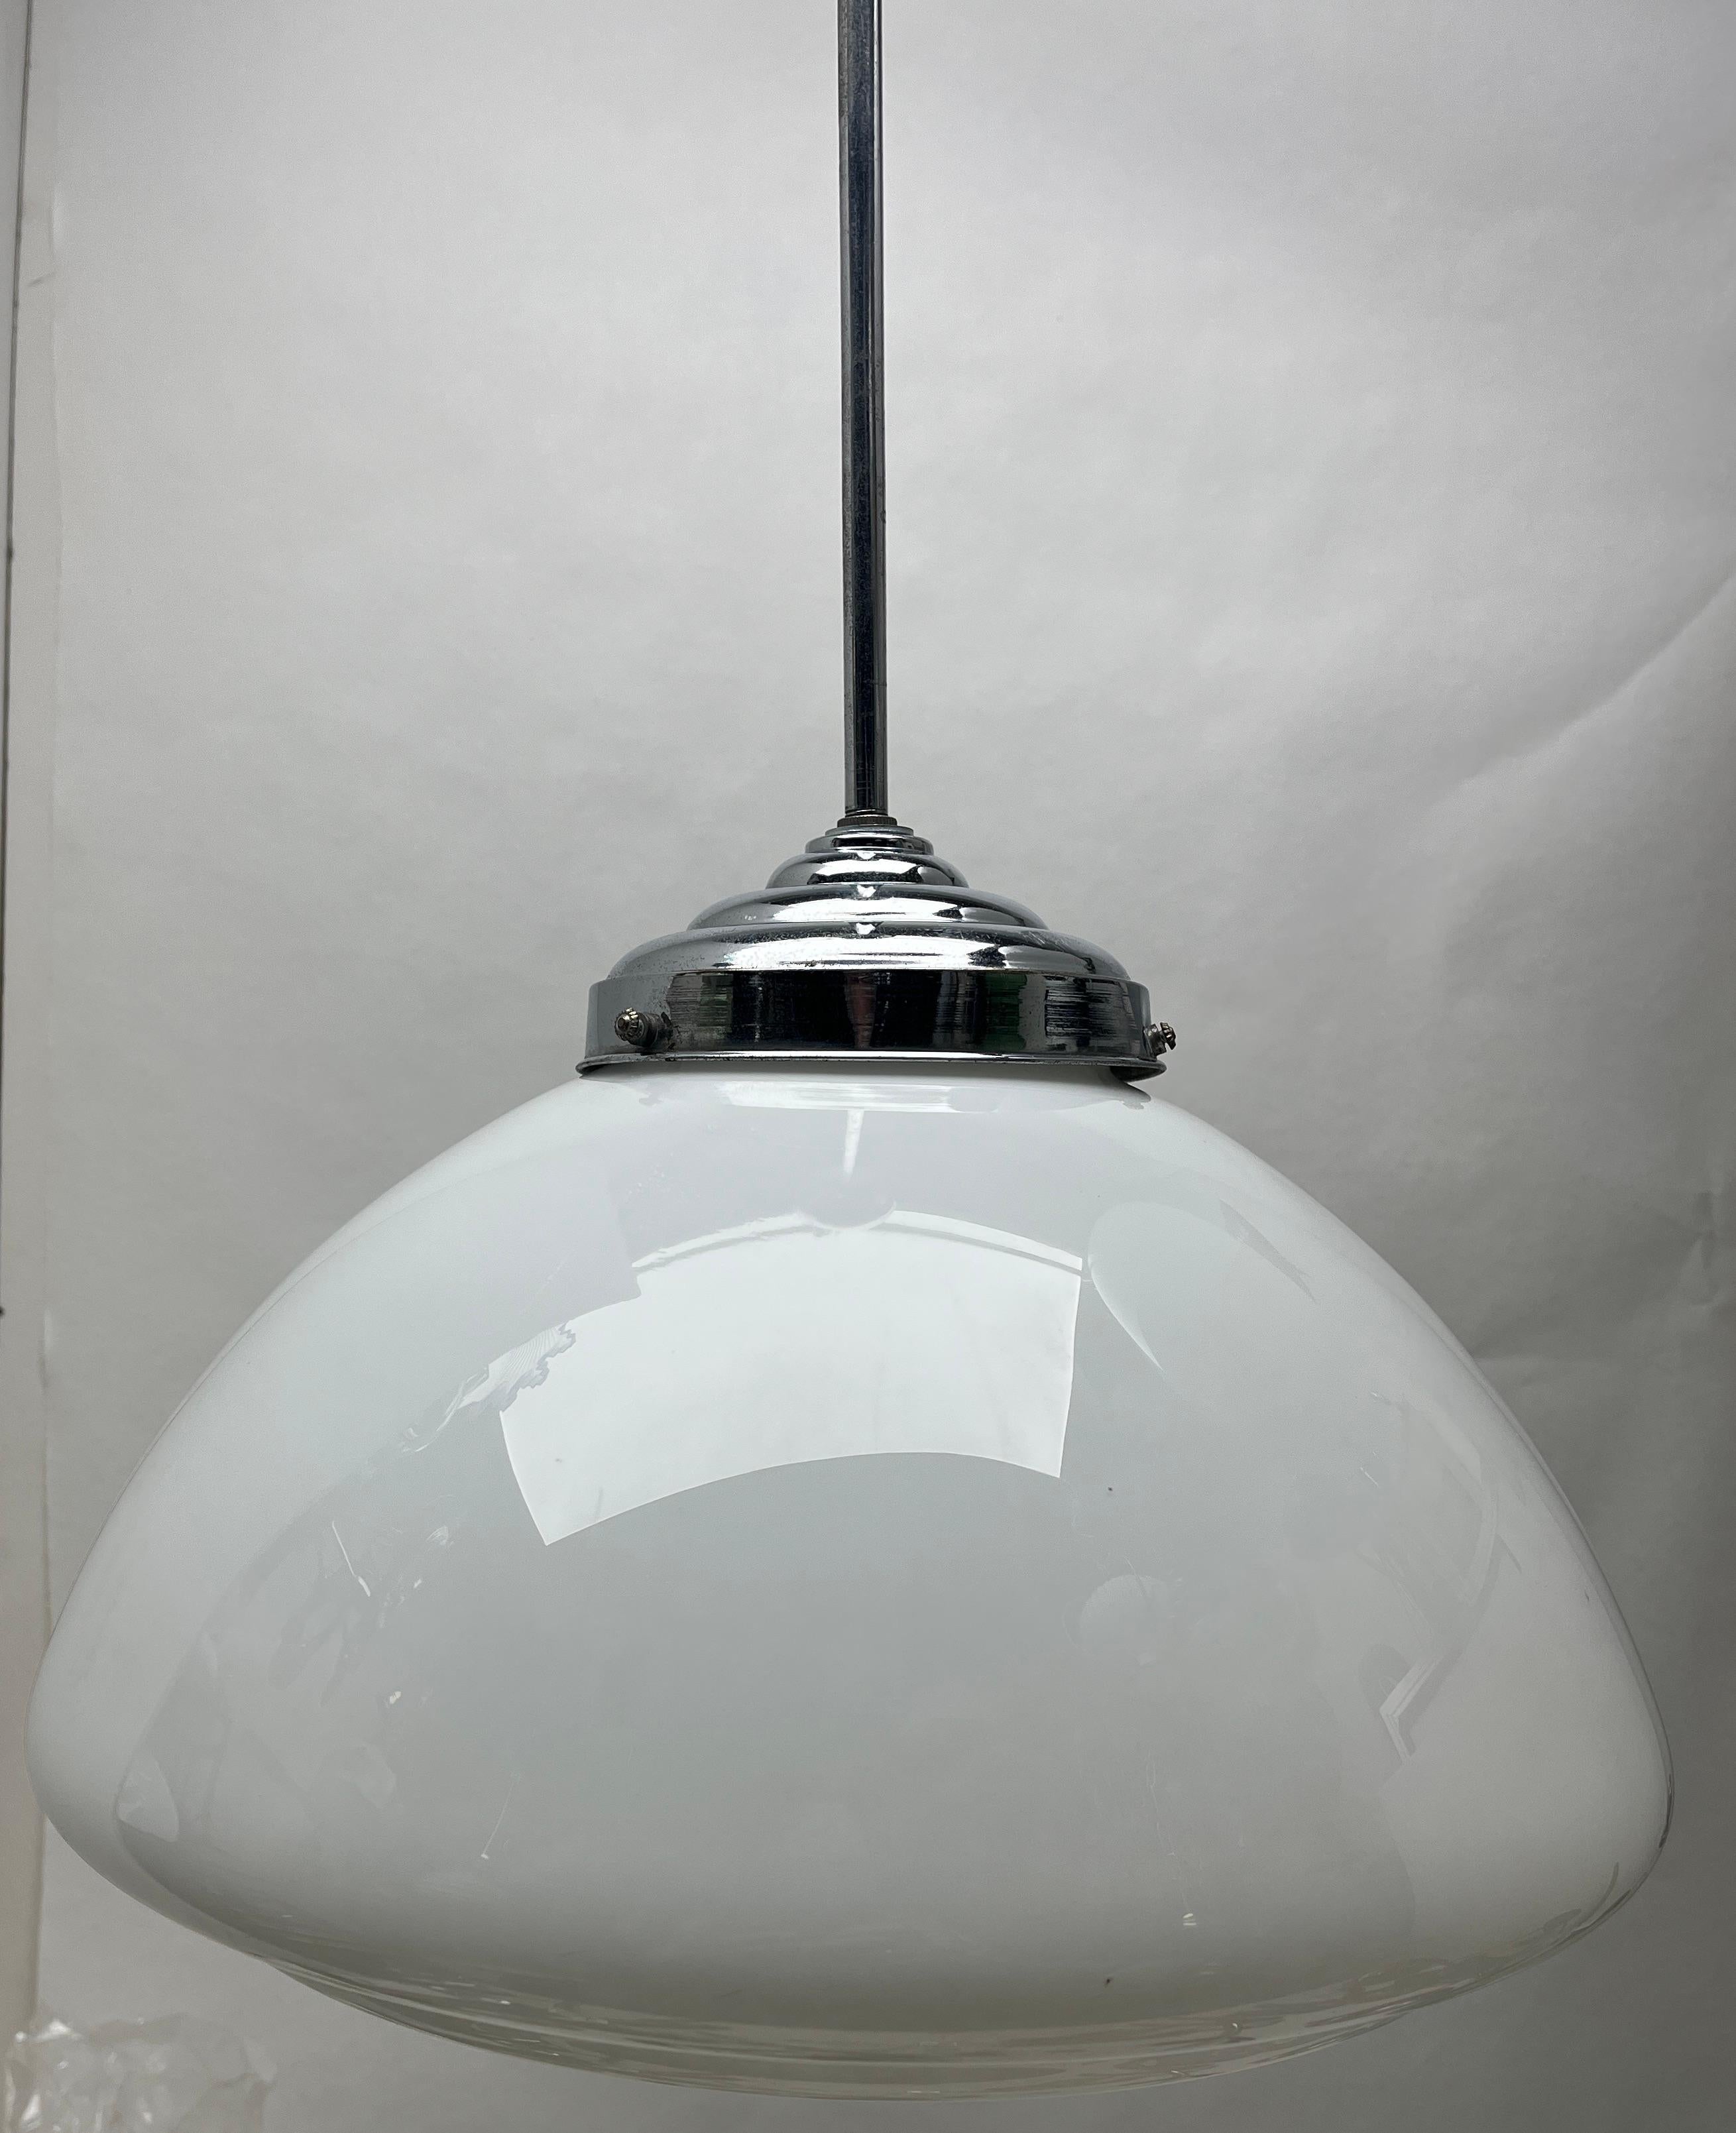 Blown Glass Phillips Pendant Stem Lamp with a Globular Opaline Shade, 1930s, Netherlands For Sale